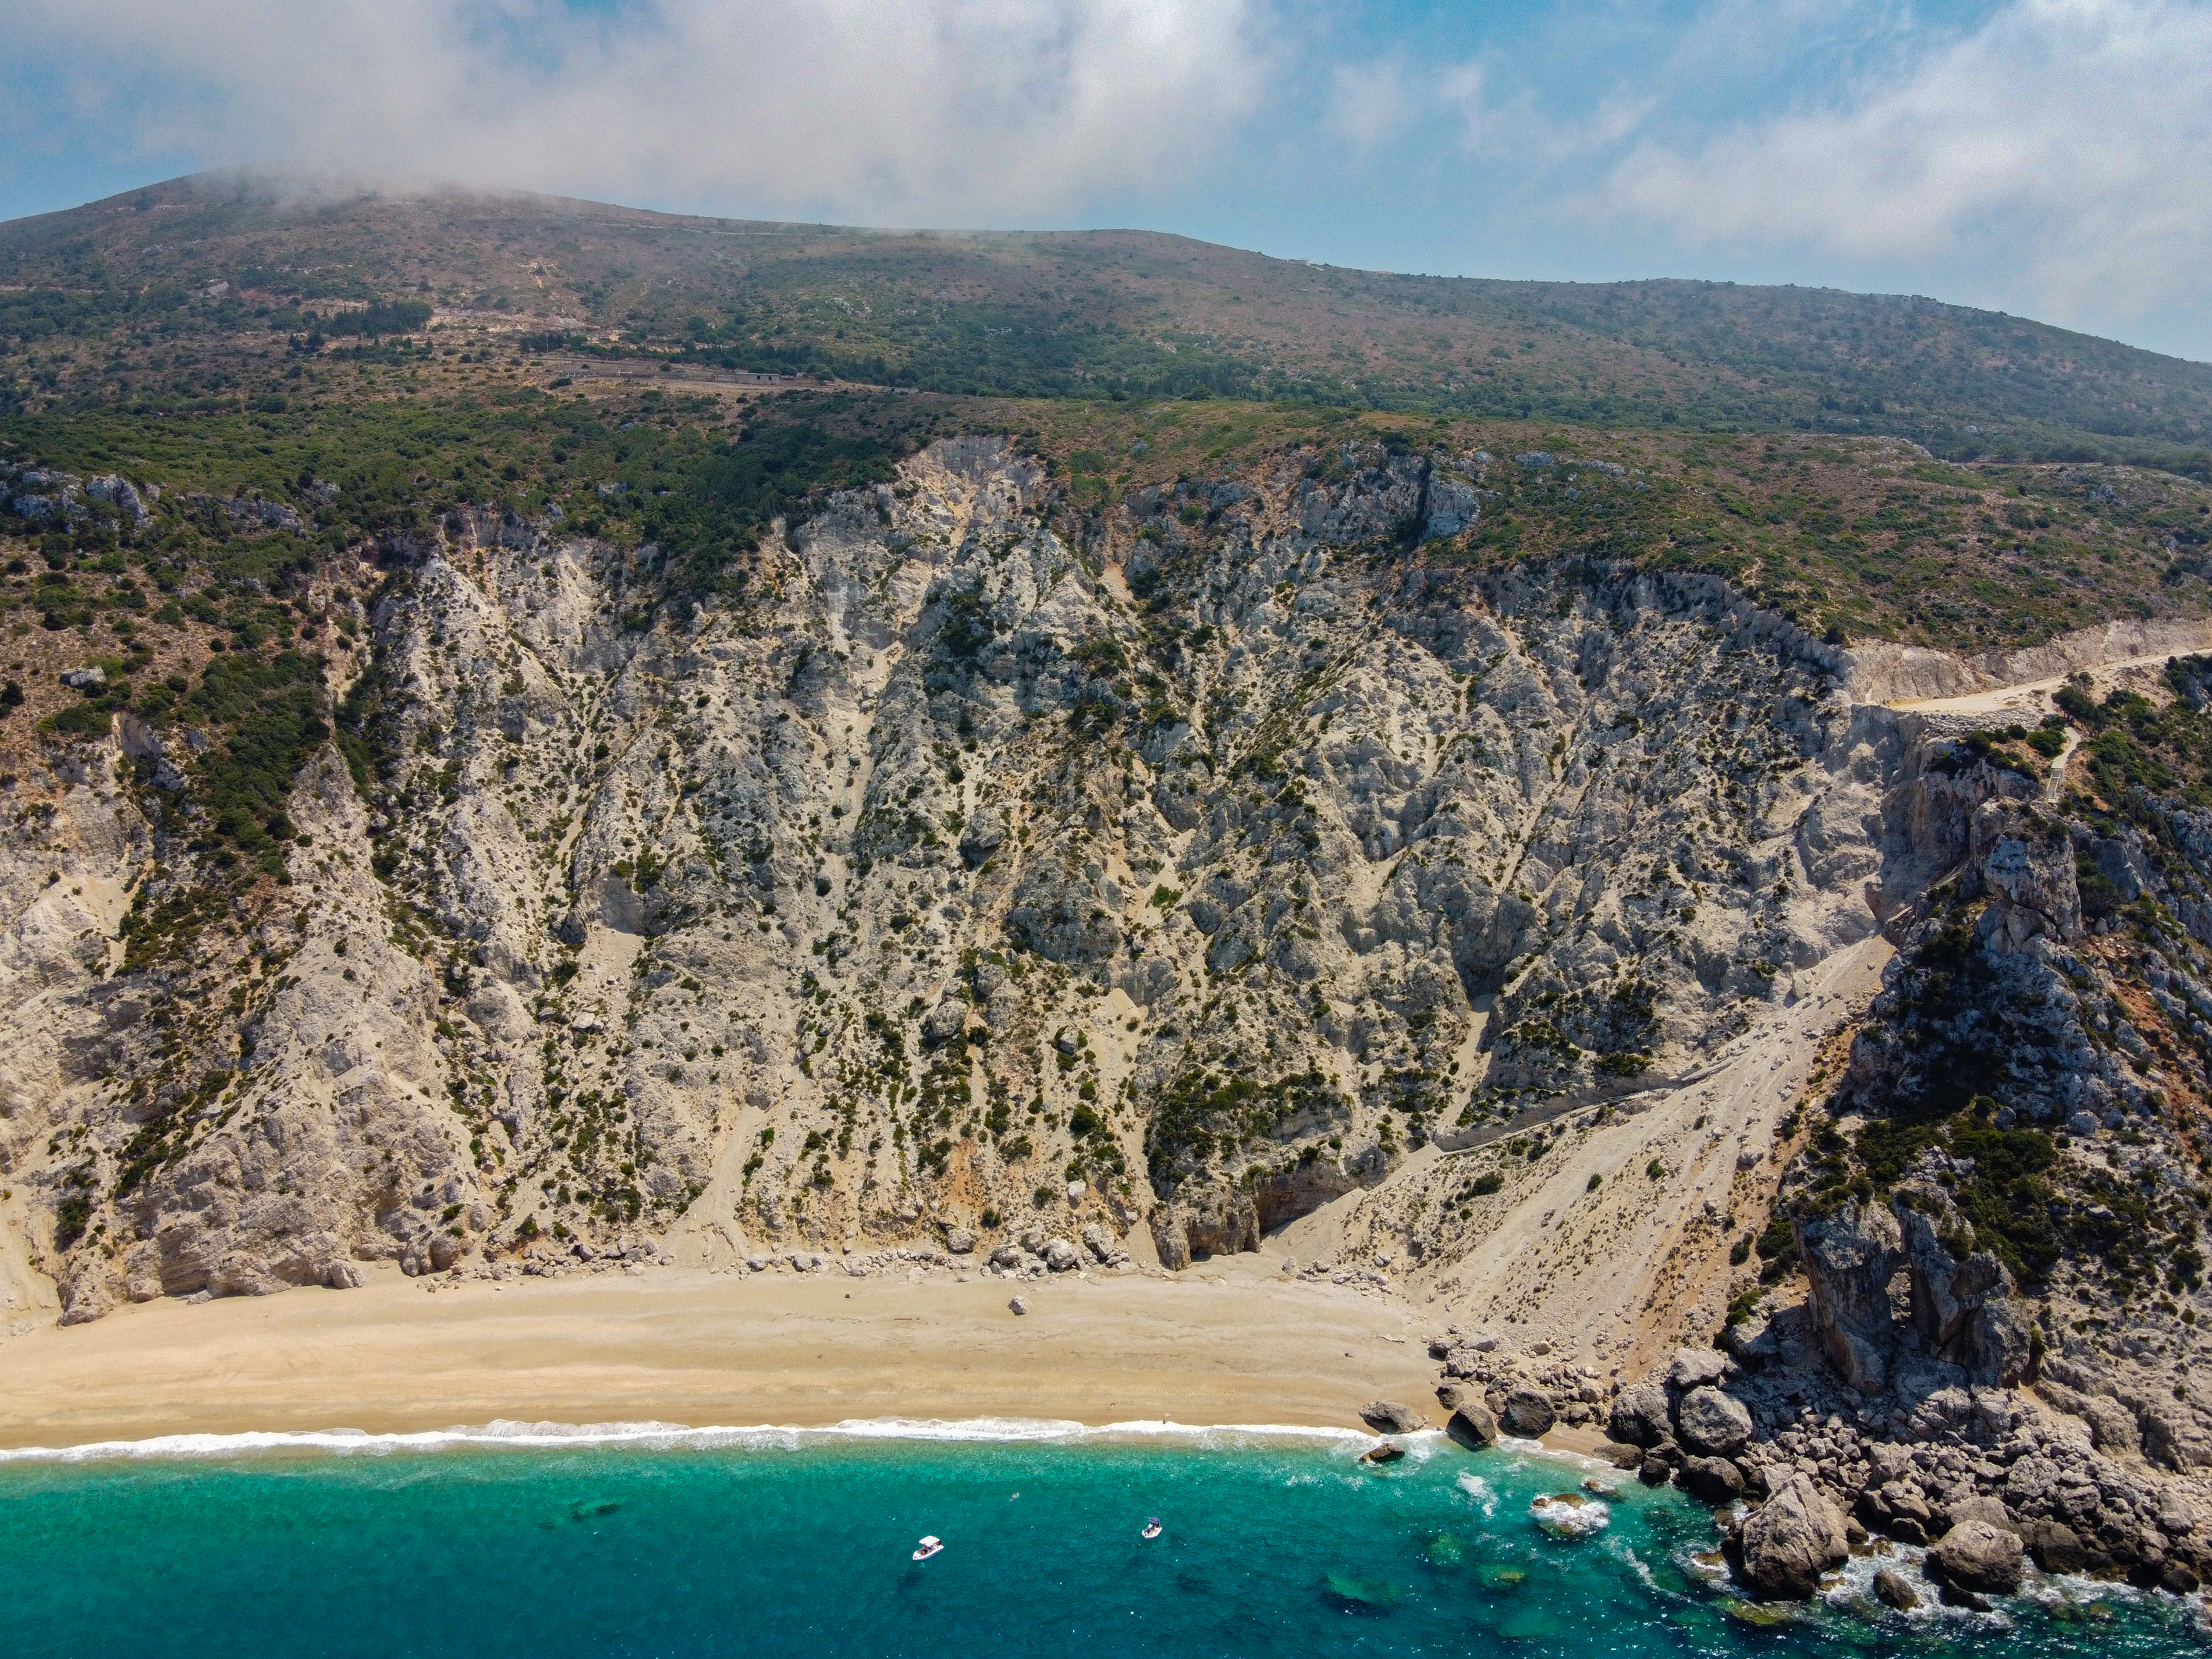 View of Platia Ammos beach from the West. Scree cones or screecan be seen caused by earthquakes